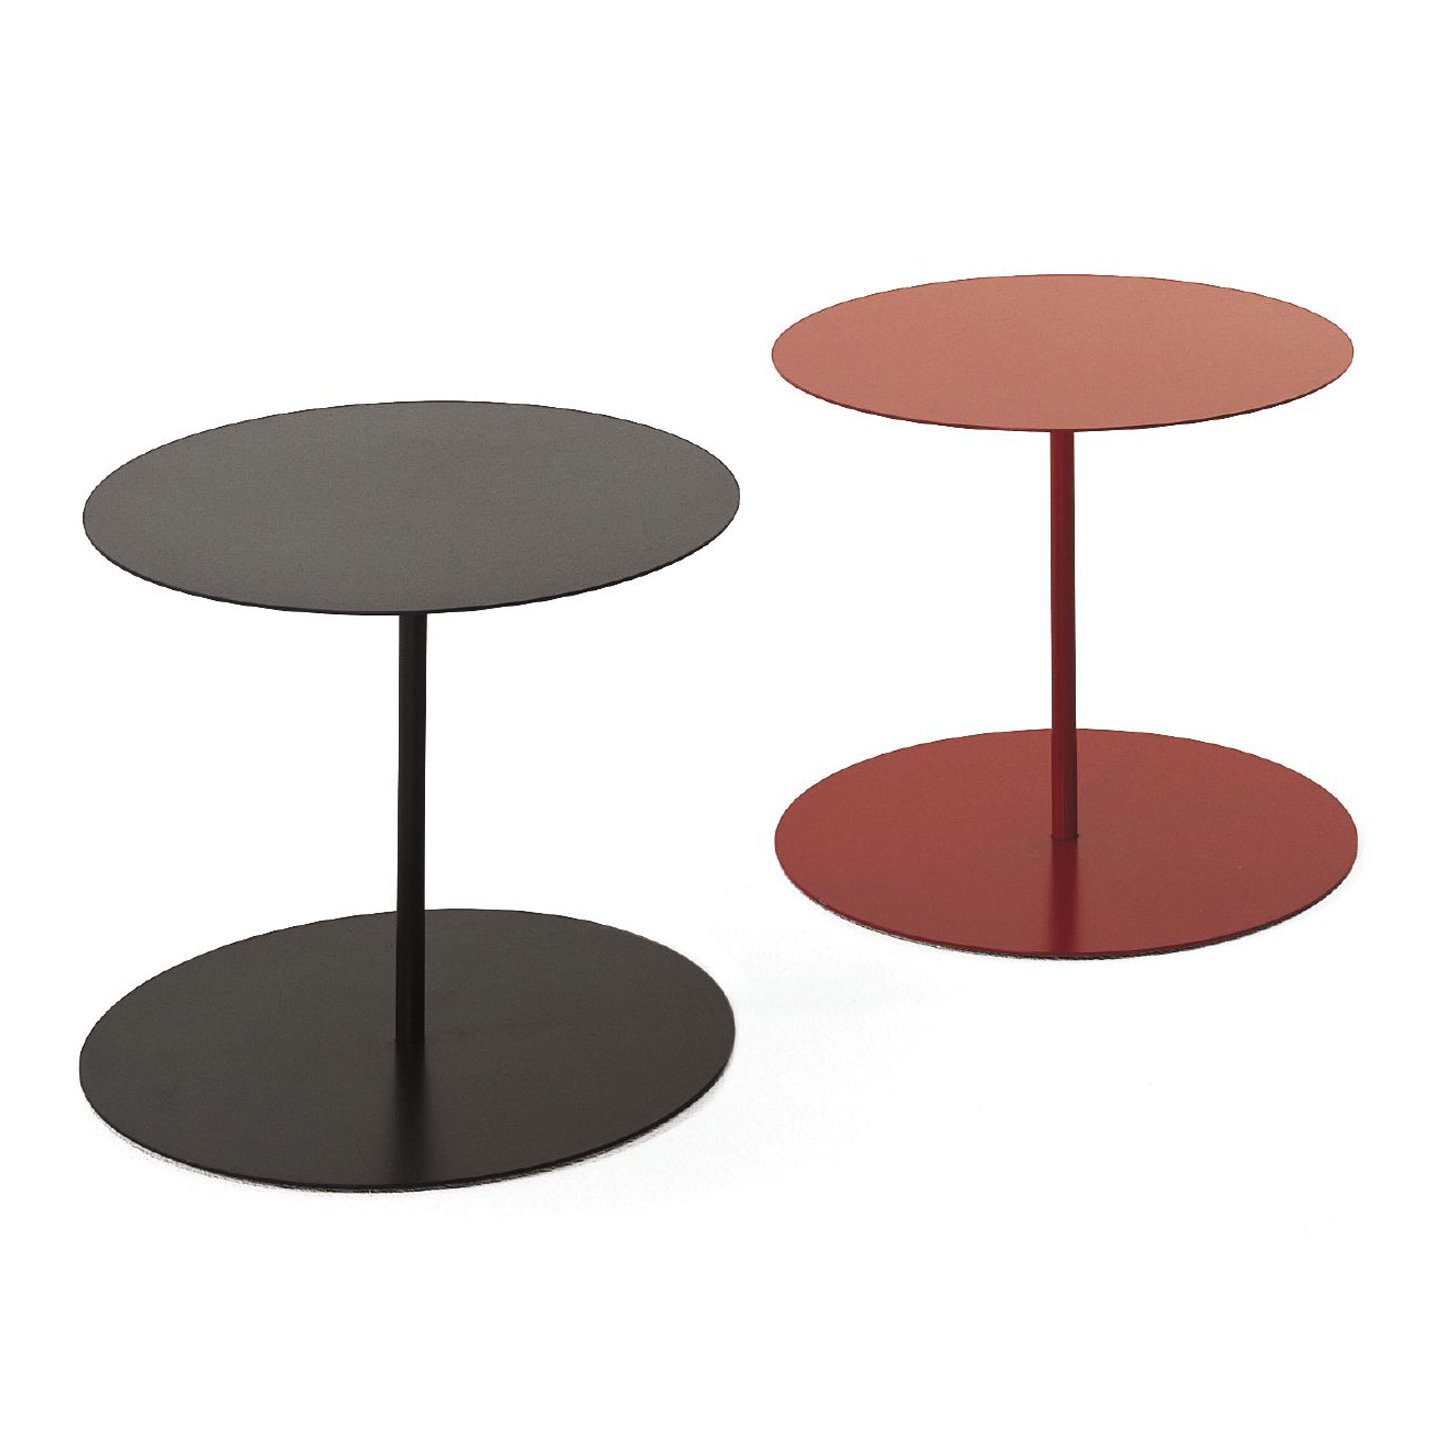 Haworth gong table with circular base and top in black and red